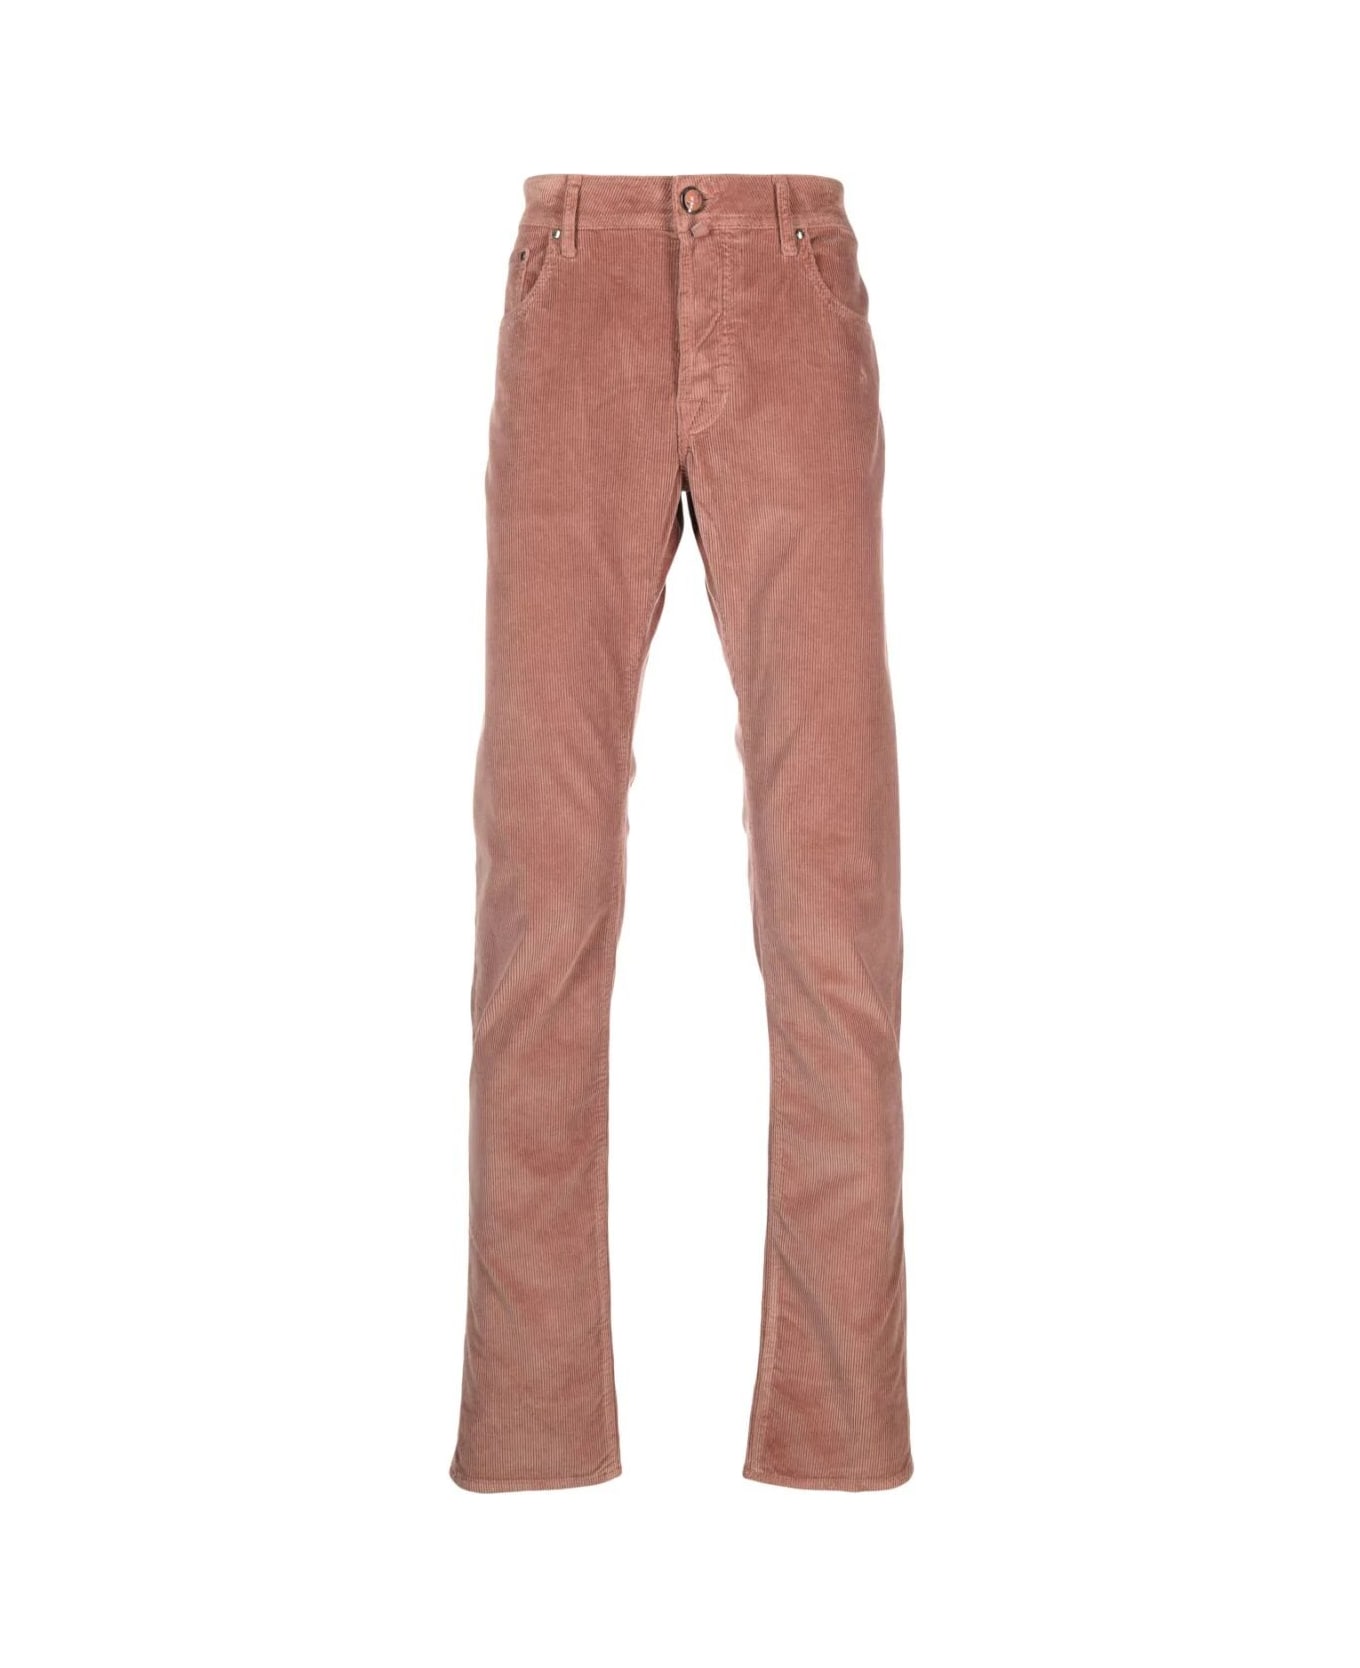 Jacob Cohen Bard Slim Fit Jeans - Dusty Pink ボトムス